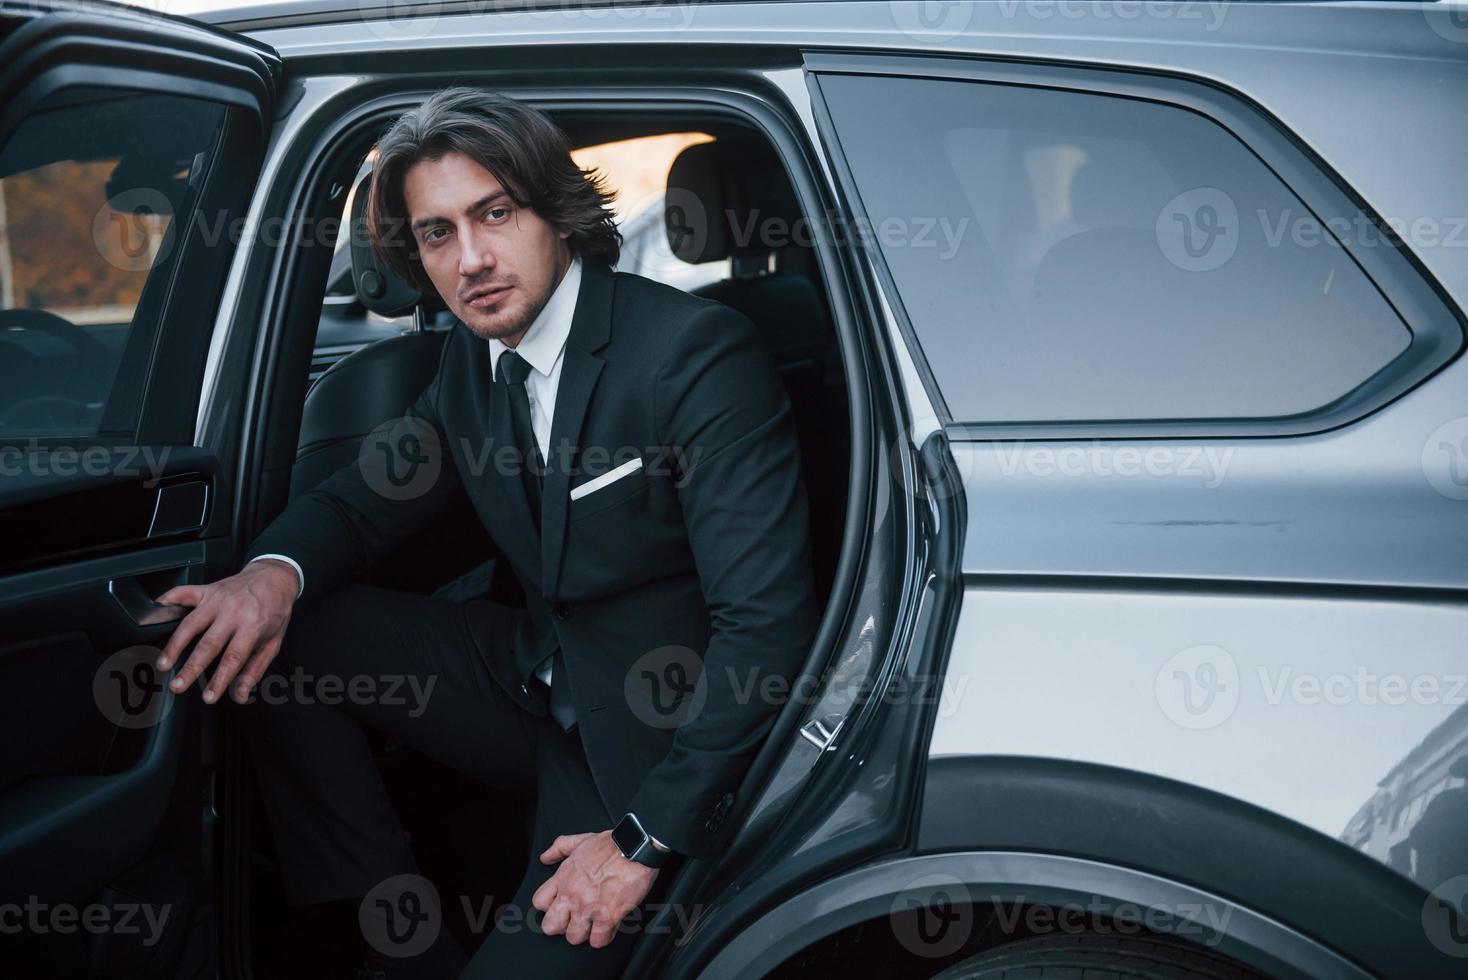 Walks out from car. Young businessman in black suit and tie inside modern automobile photo